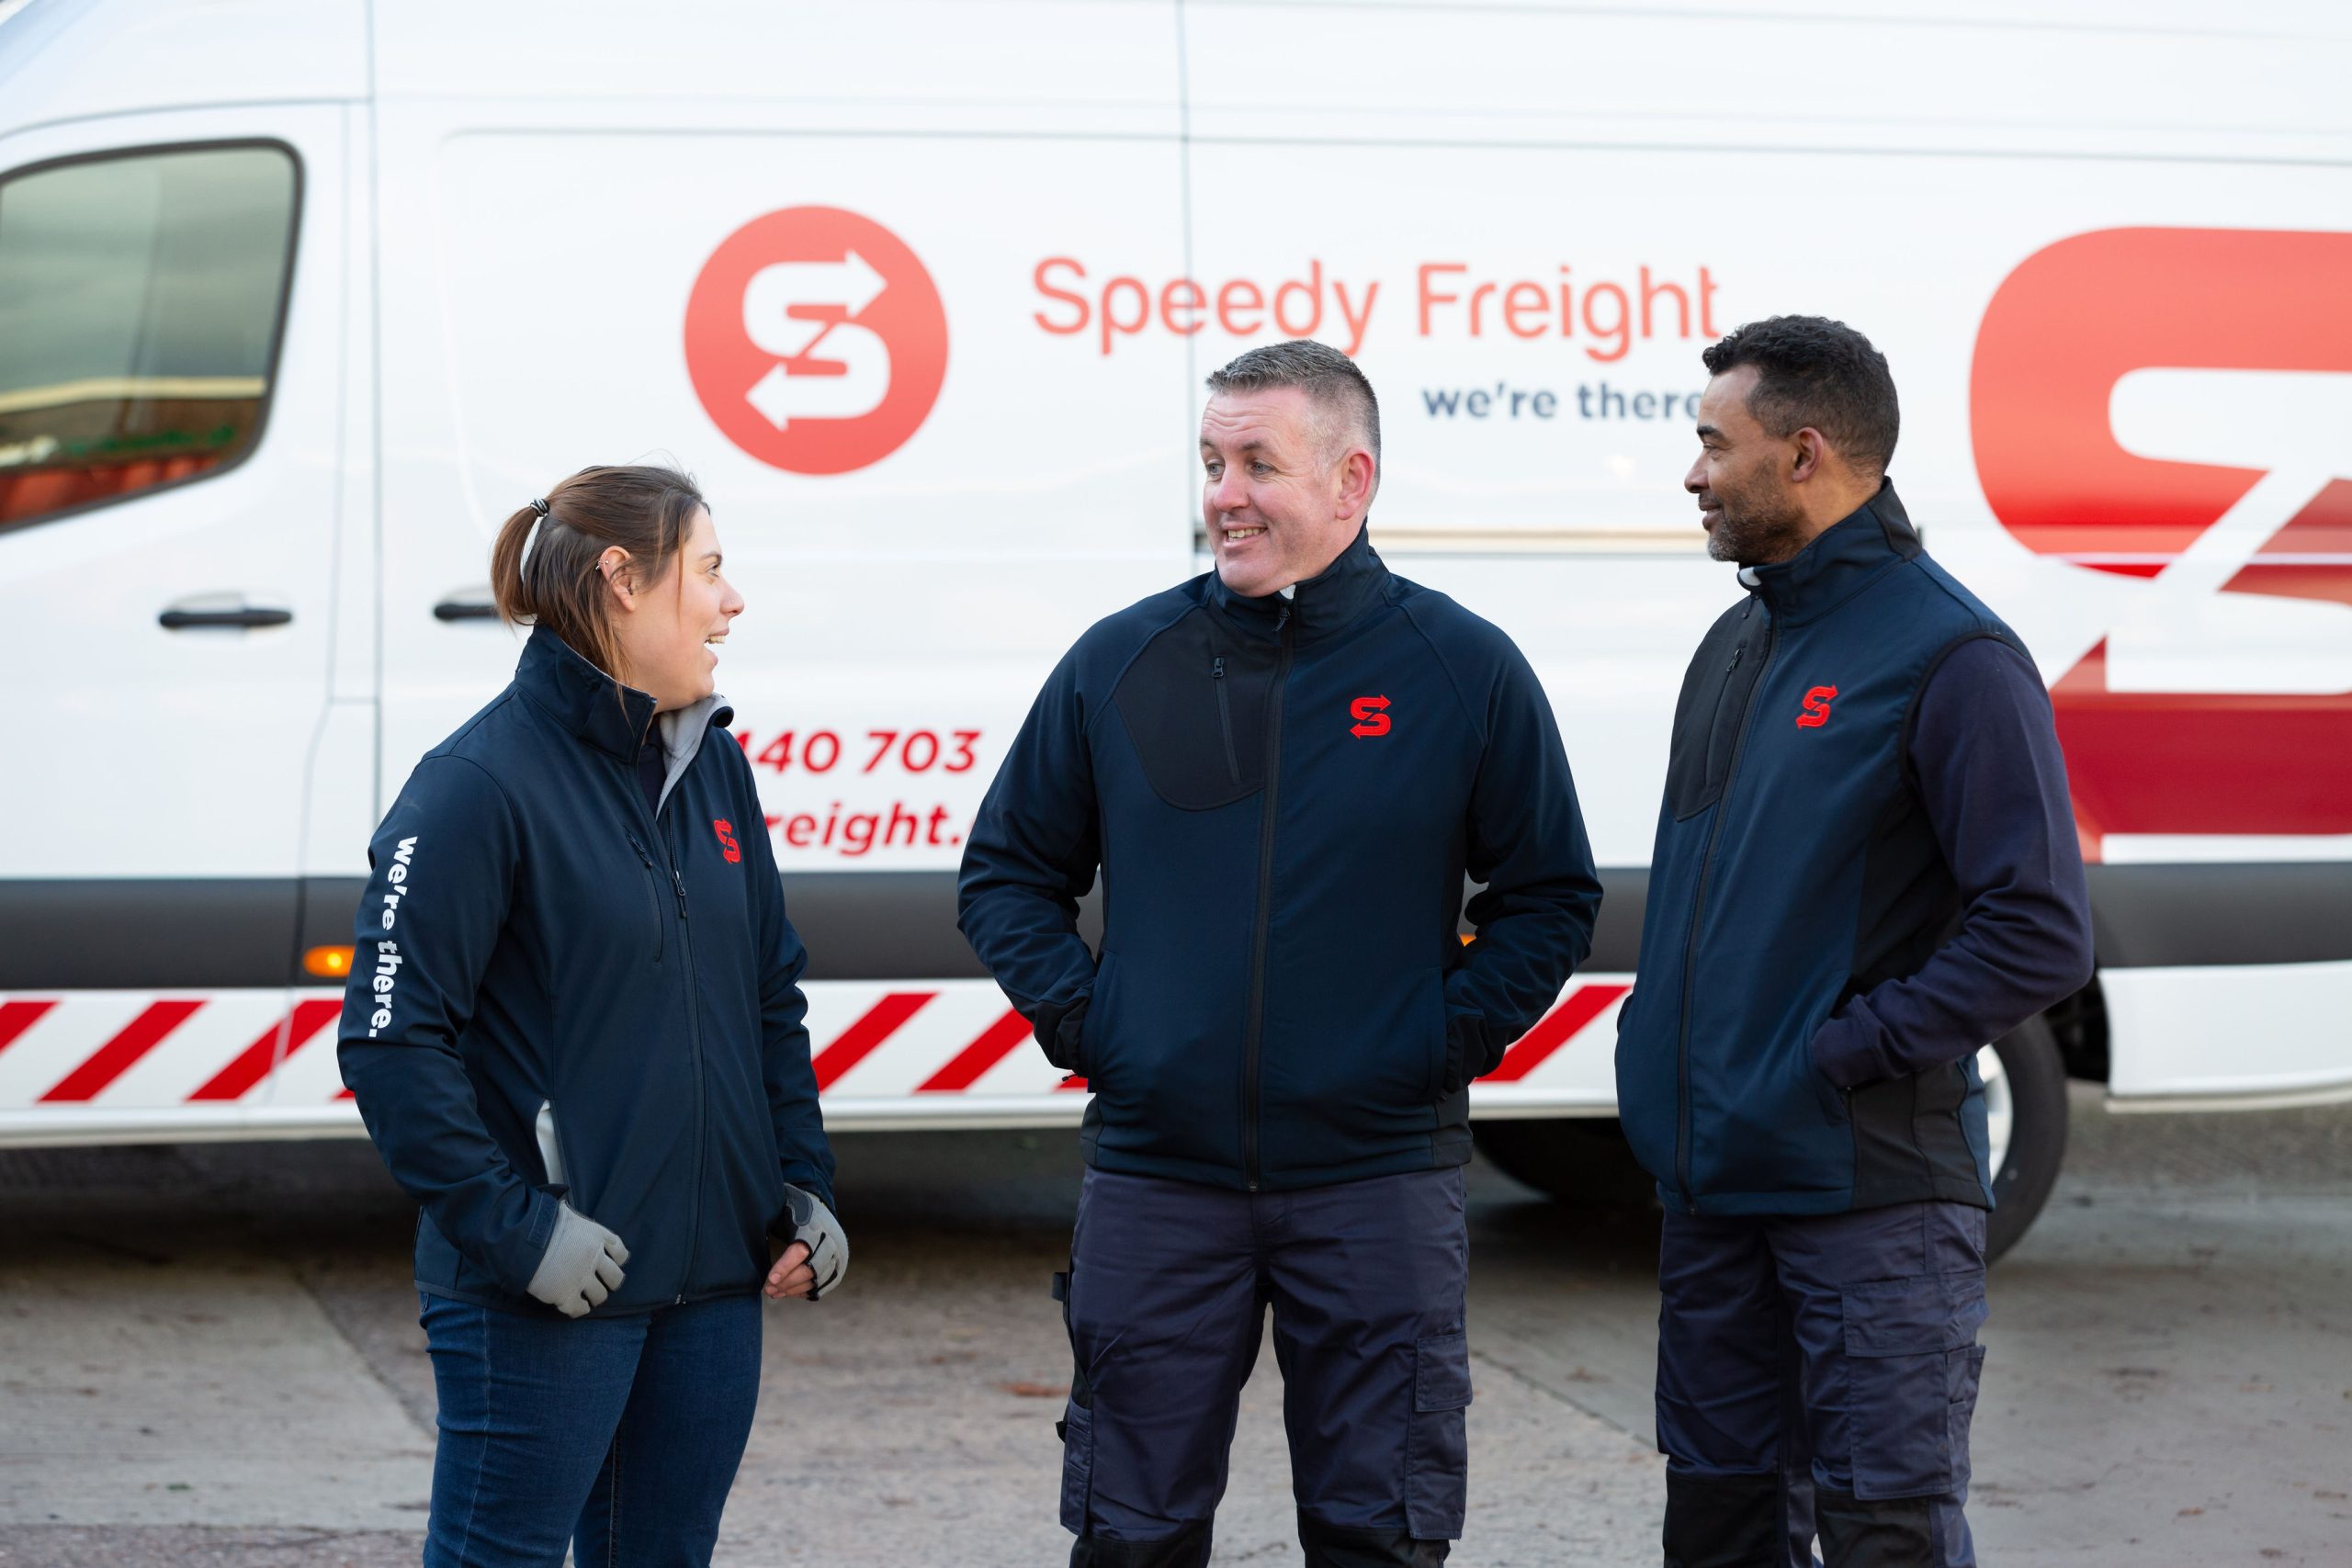 Speedy Freight - The Best UK Courier Service With a Huge Local Courier Network.